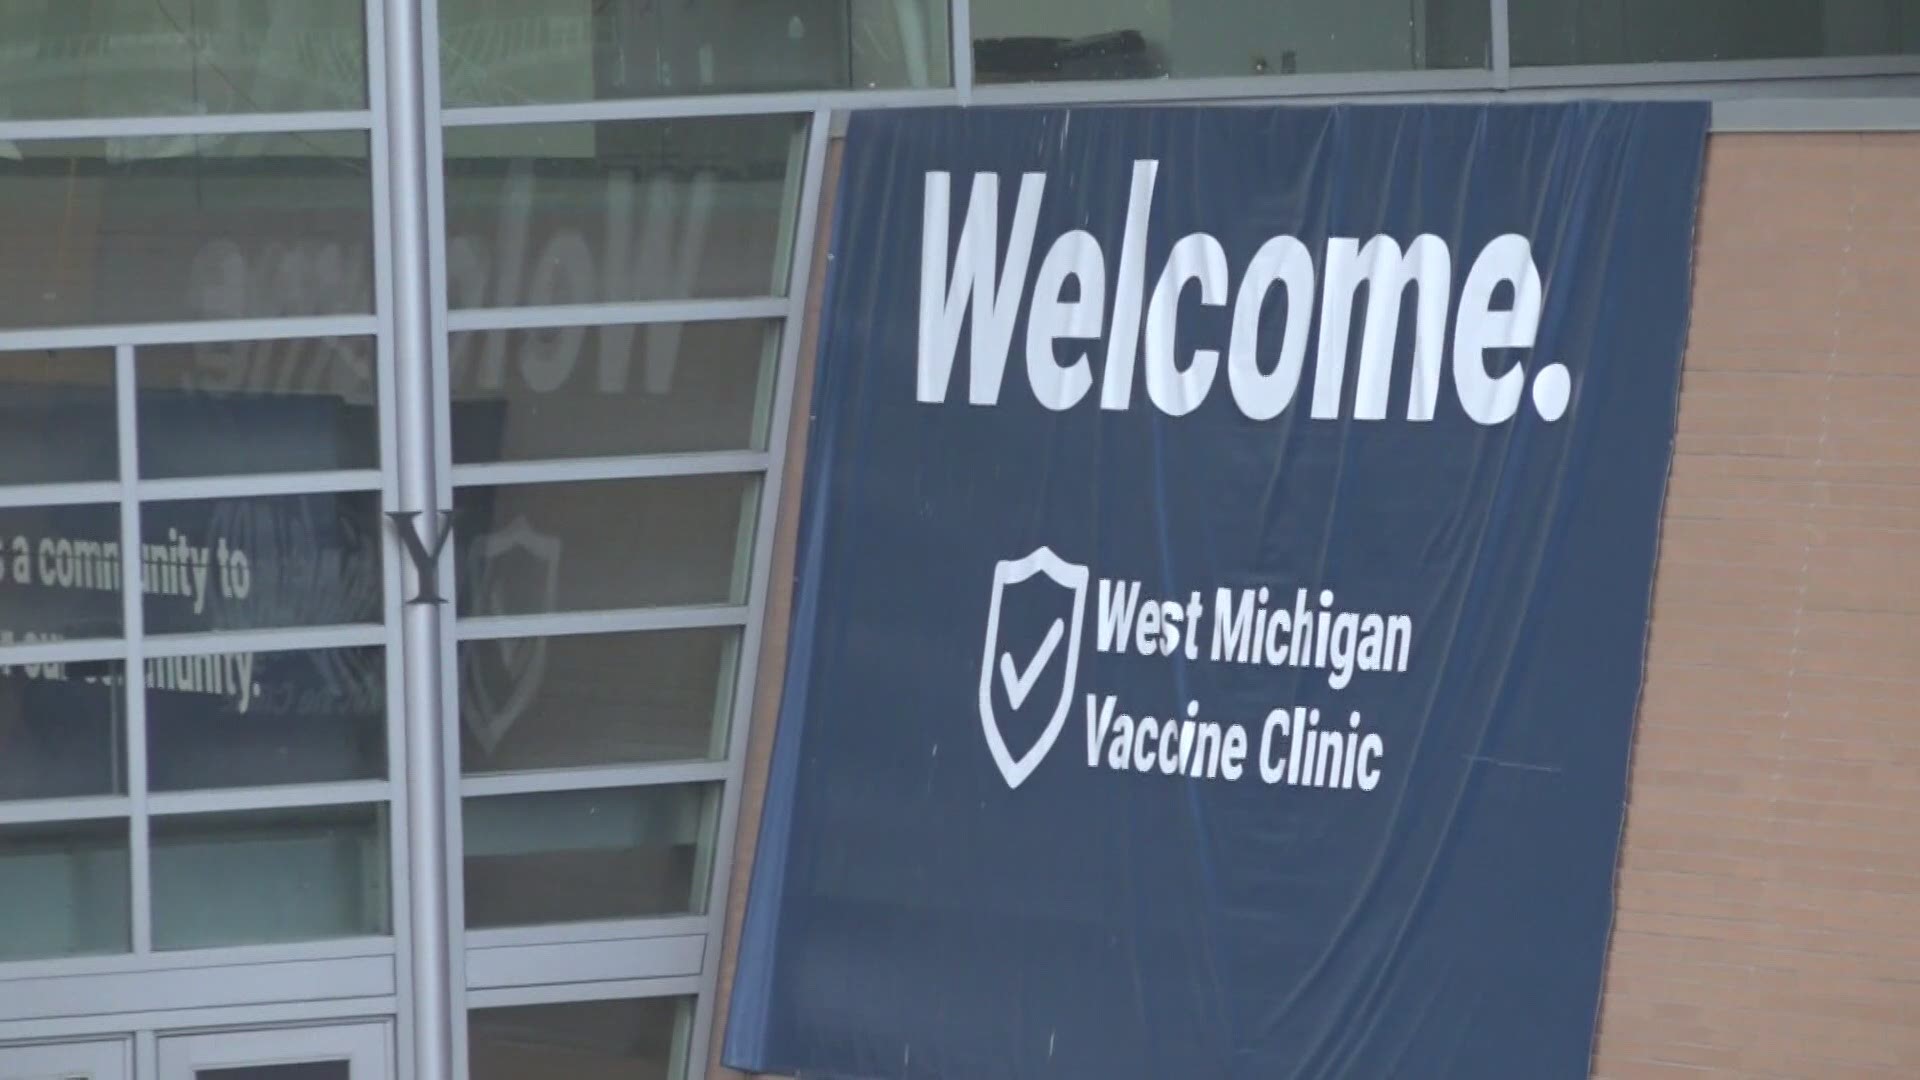 In West Michigan, the vaccine clinic at DeVos Place has been pivotal in the fight against COVID-19.